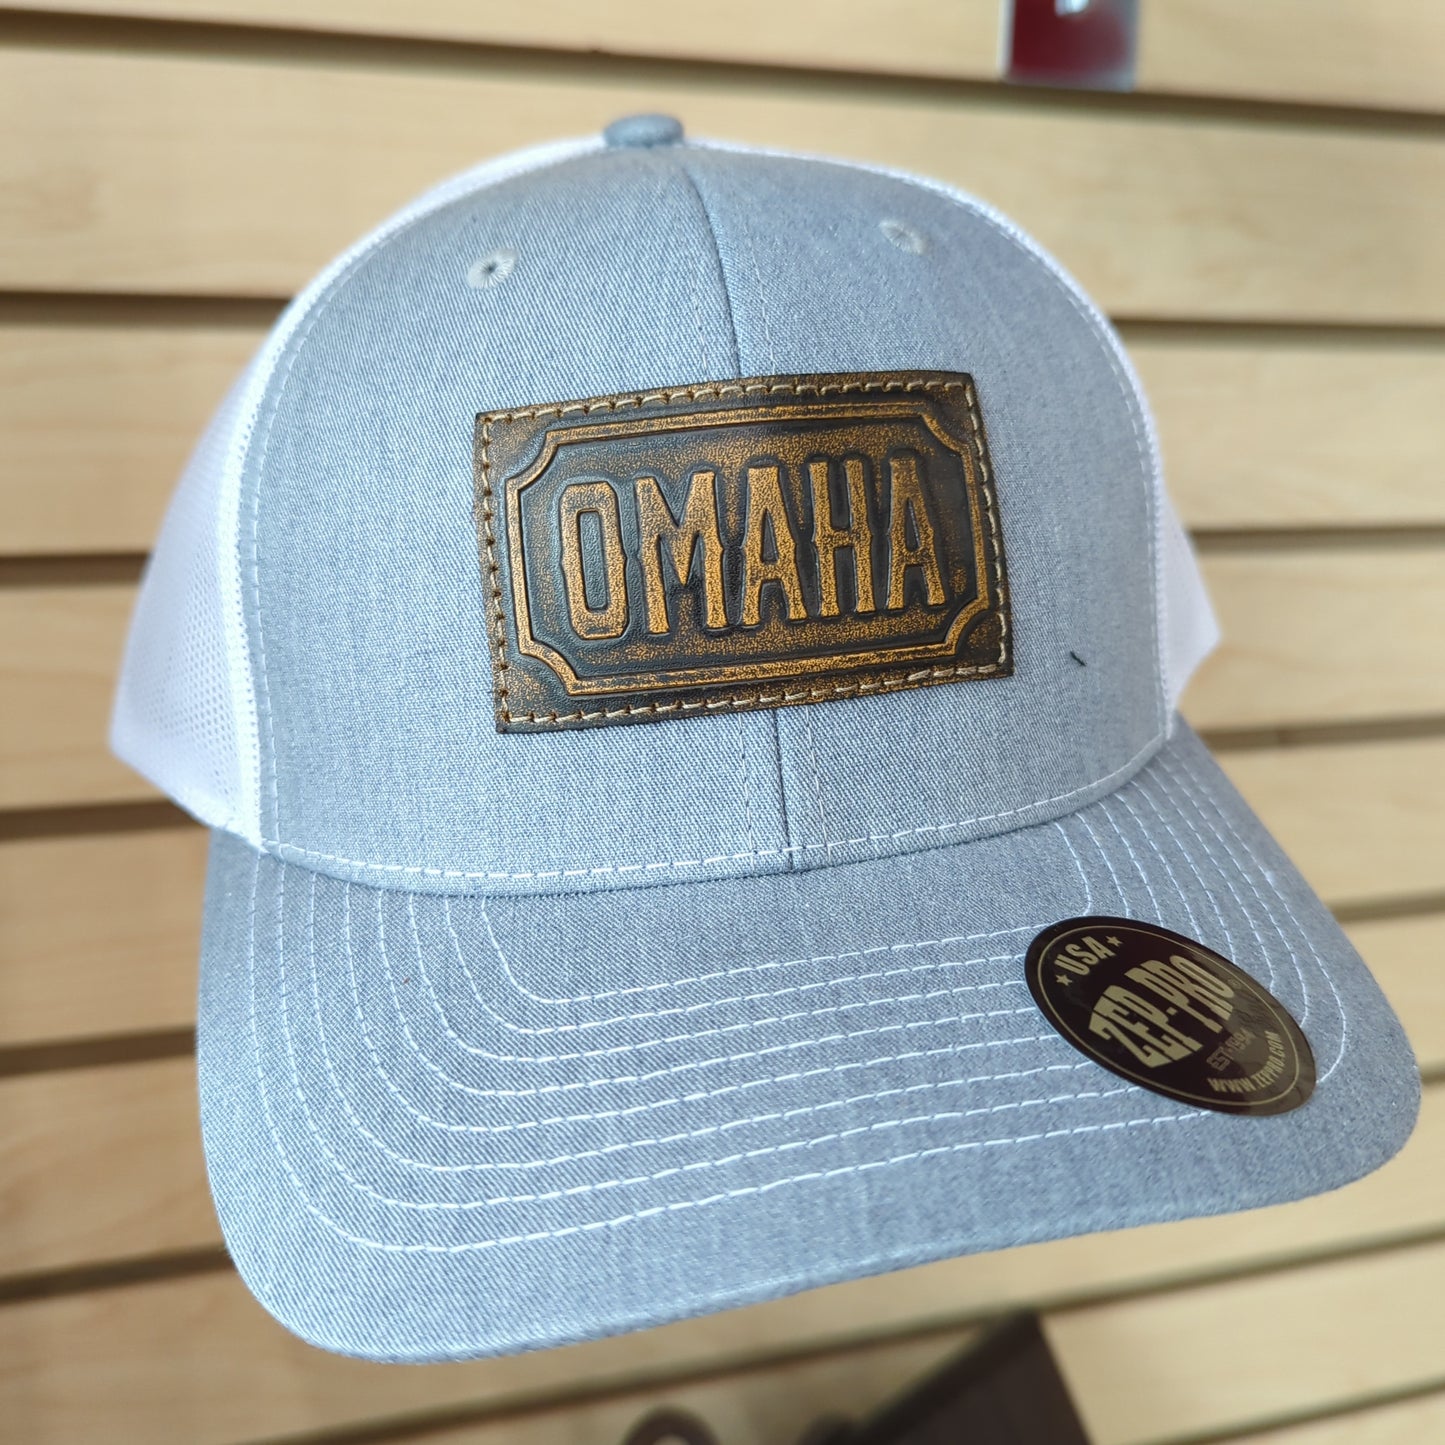 Omaha rectangle patch hat